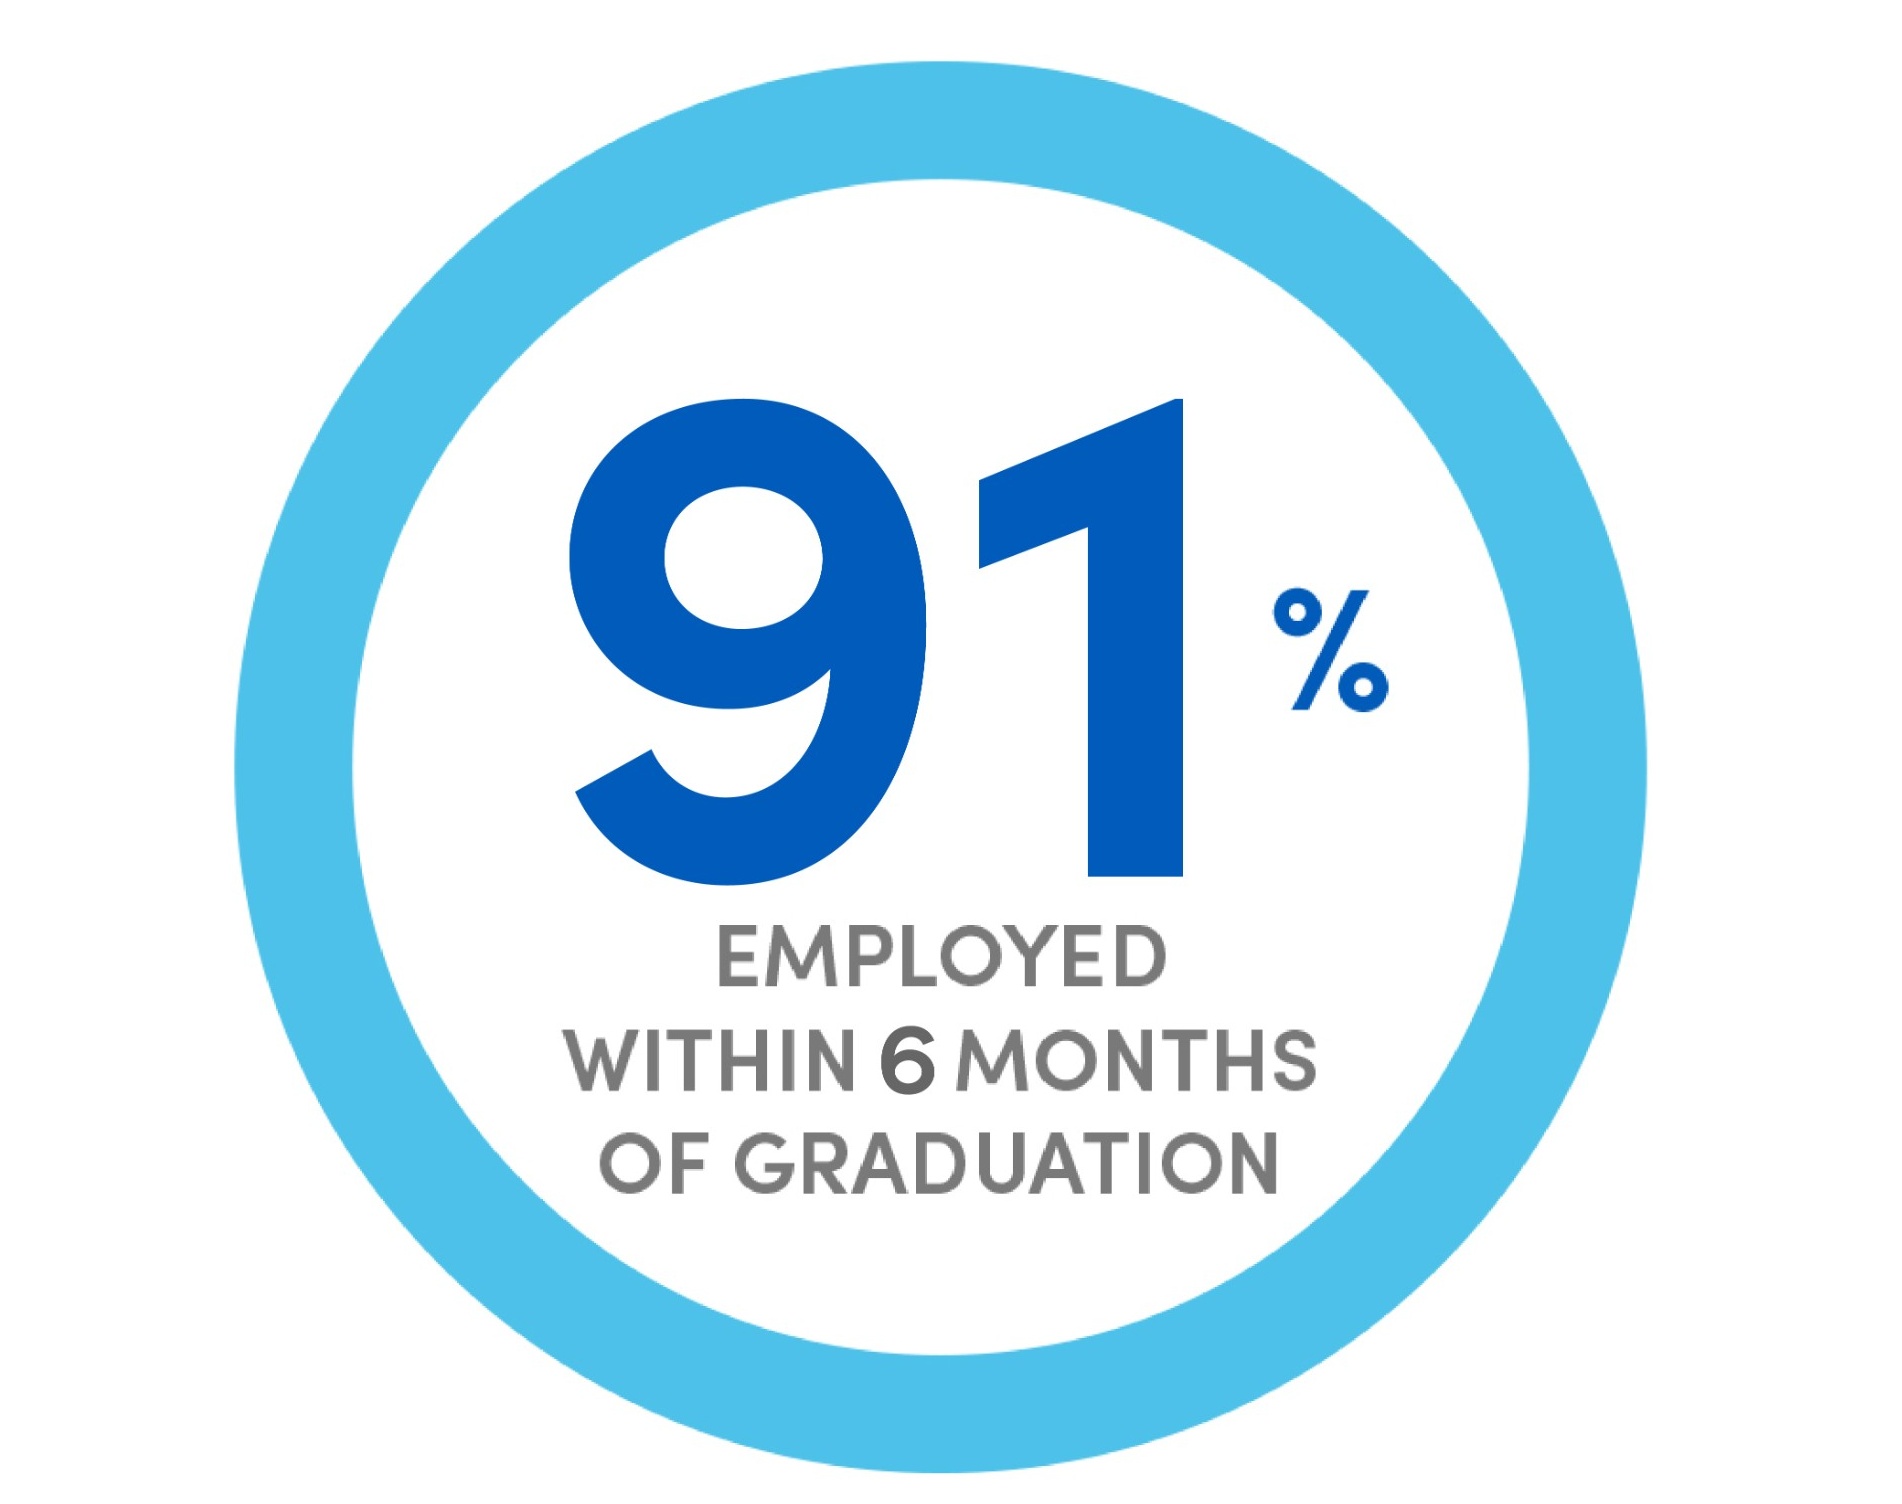 91% employment within 6 months of graduation. 